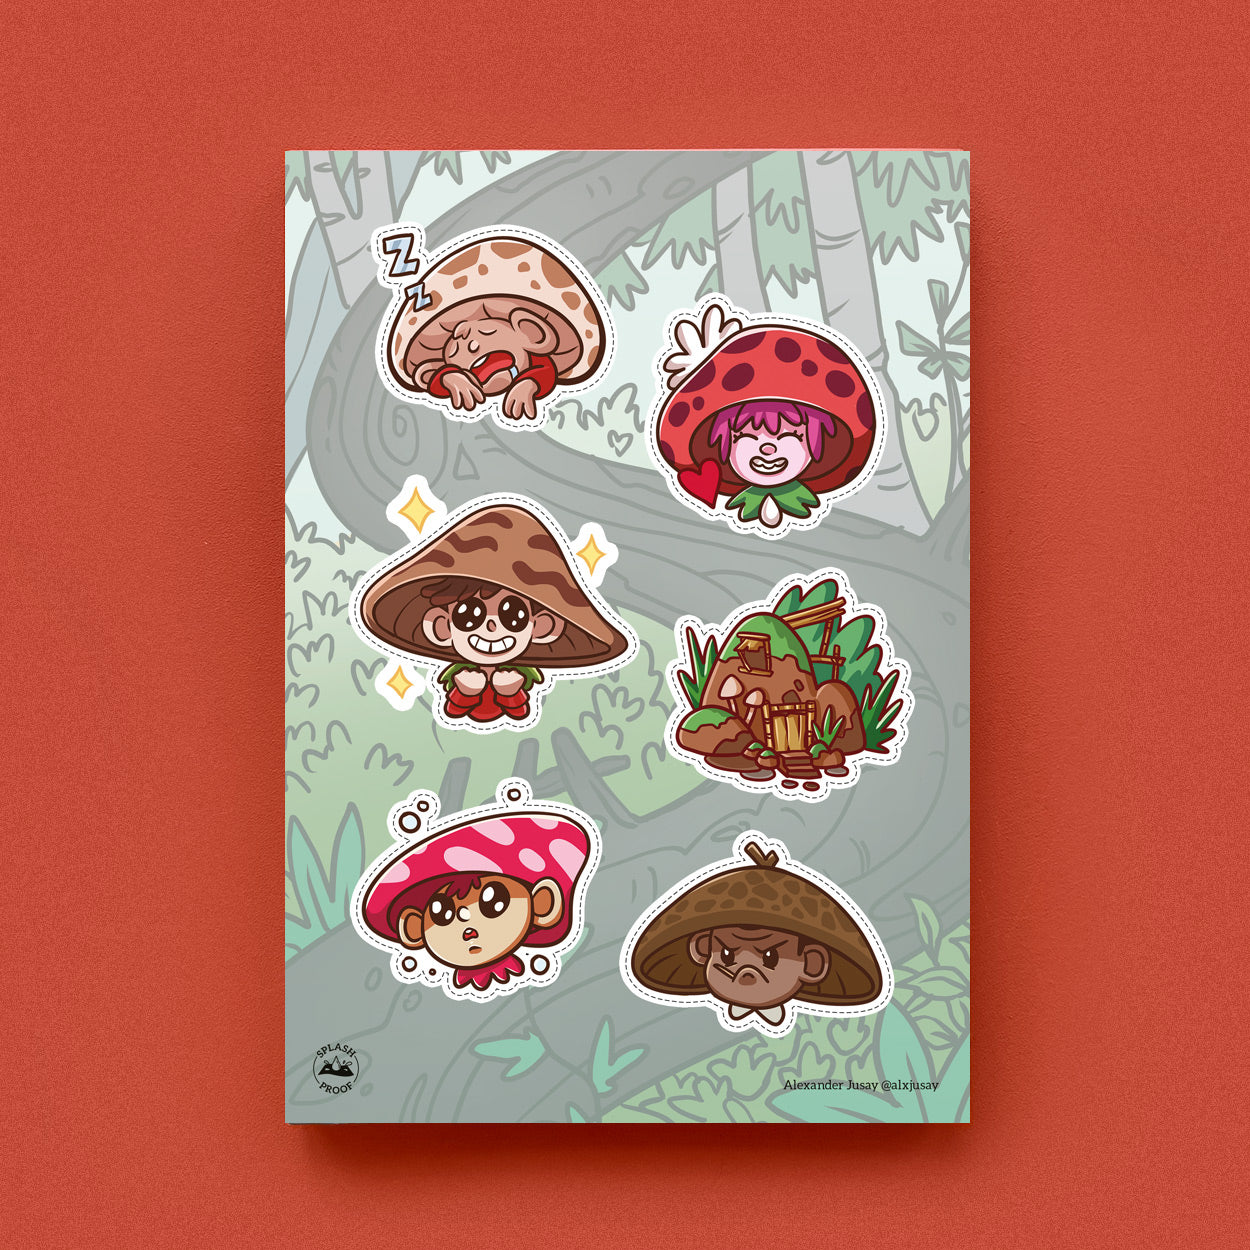 Gentle People Dumaguete City artist art craft book stickers sticker cute creative gift souvenir solution travel tourism Belfry tricycle Cil Flores sticker page journal journaling scrapbooking hobby art collector Dumaguete city exhibition Alex Jusay